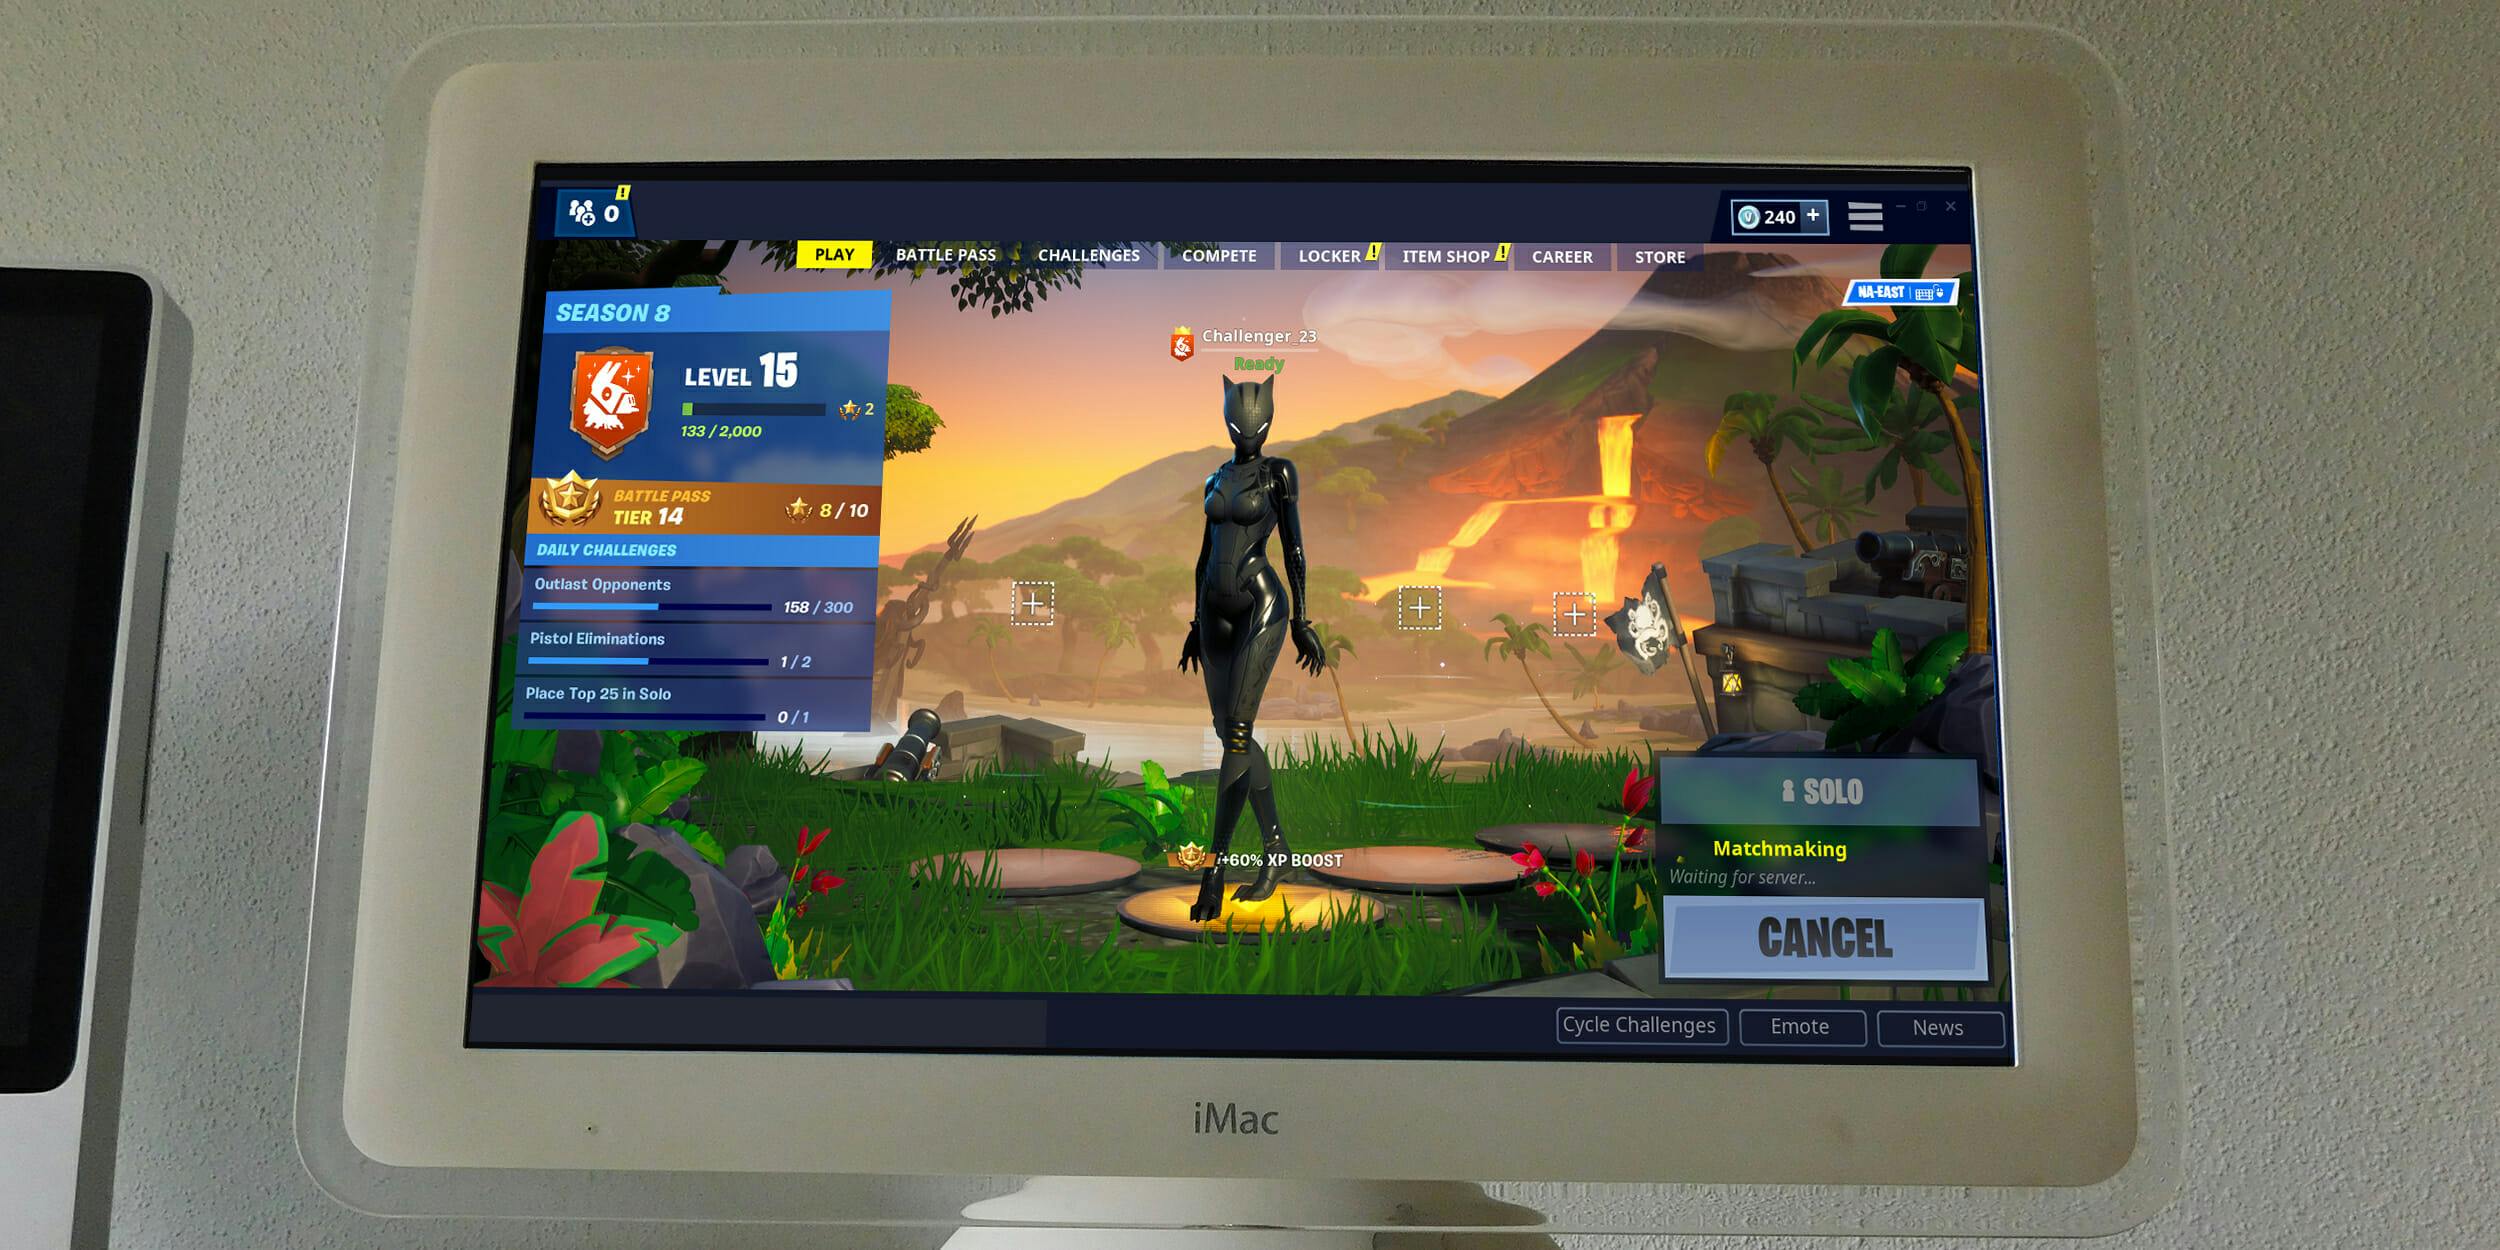 How to Play Fortnite on Mac Tips, Requirements, and More